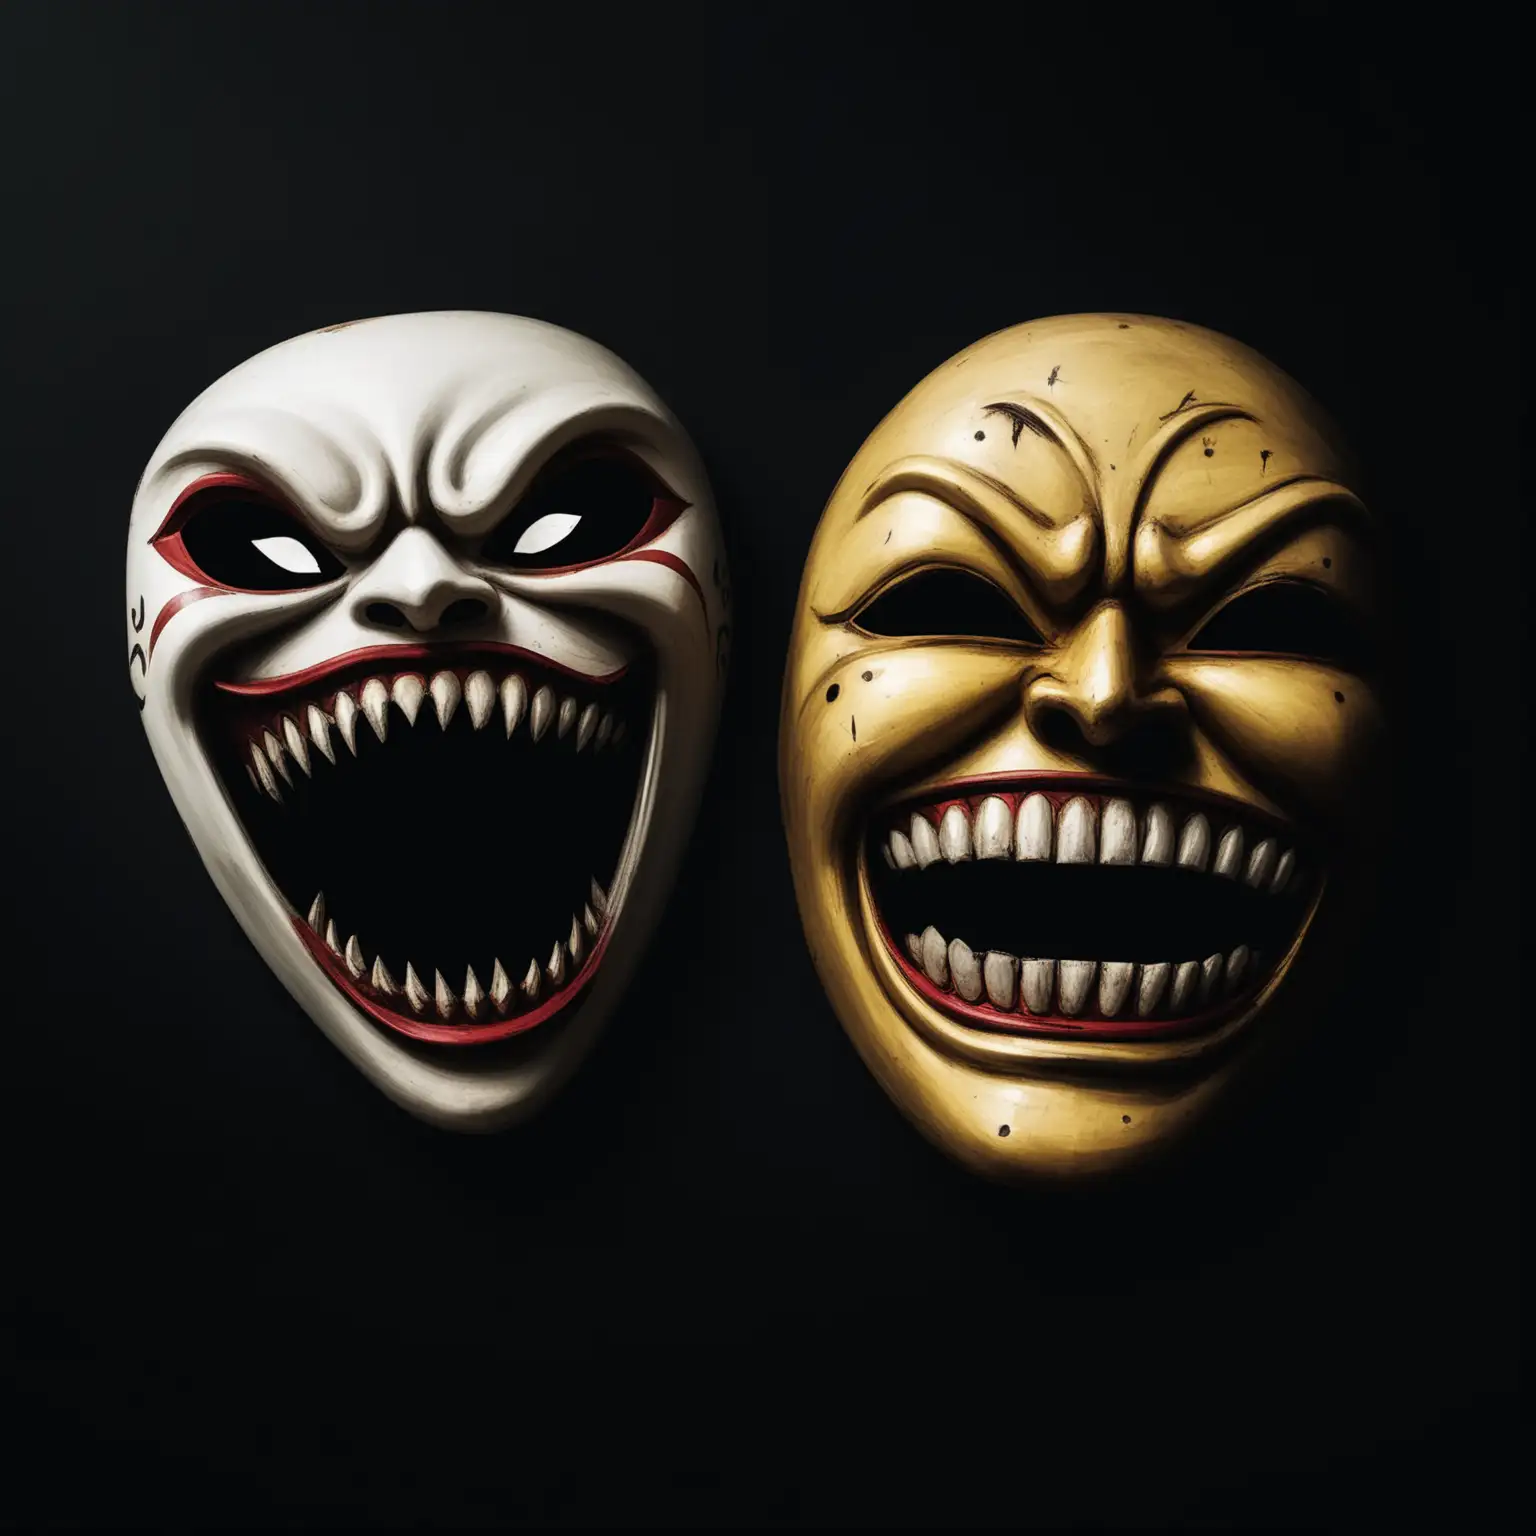 one happy mask next to one angry scary mask with teeth black background
